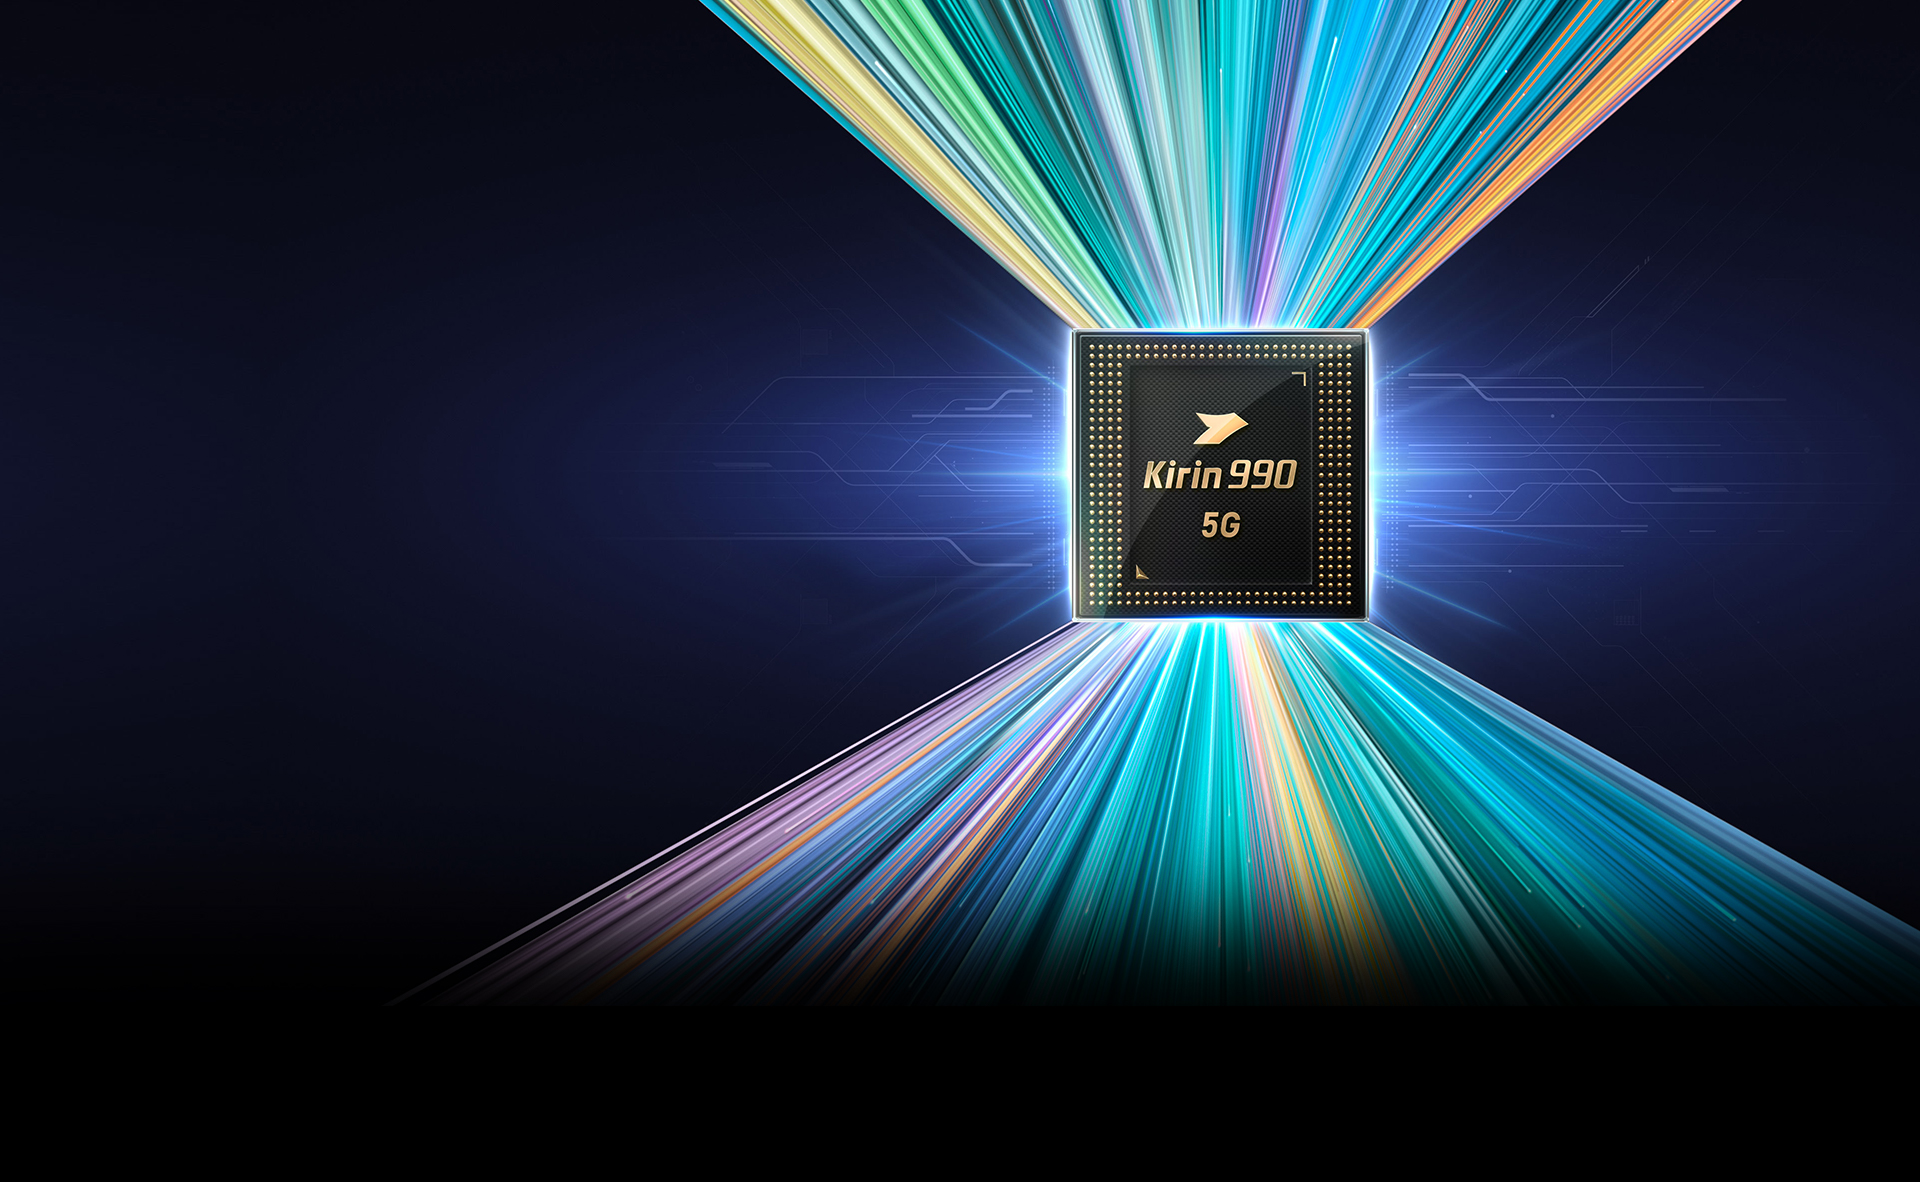 Huawei unveils the integrated 5G Kirin 990 for the Mate 30